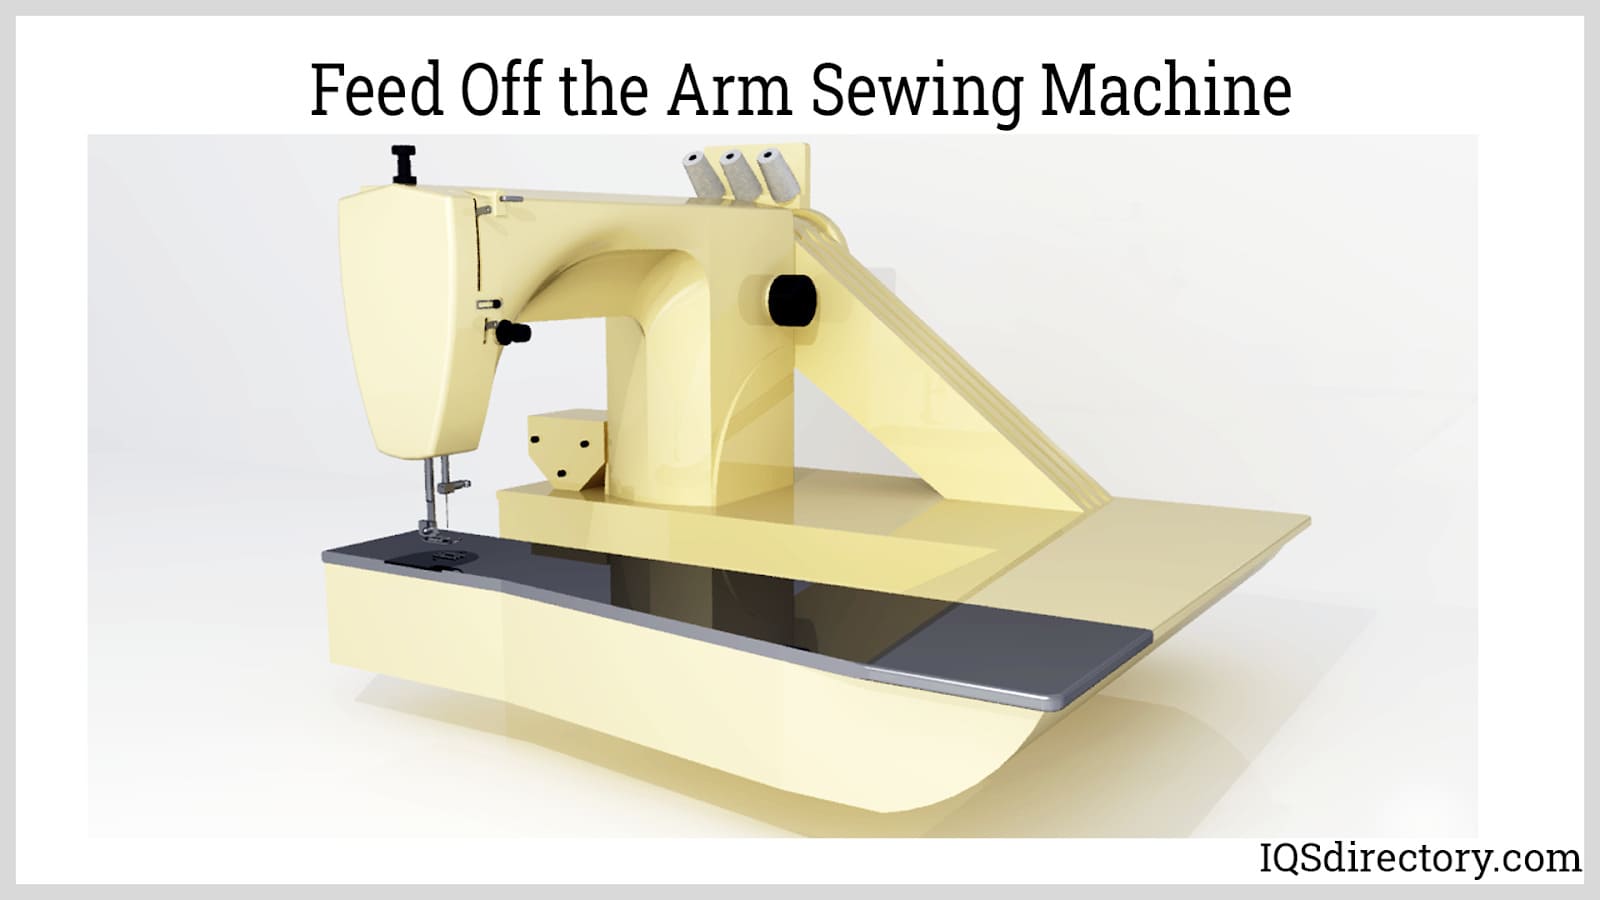 Feed Off the Arm Sewing Machine